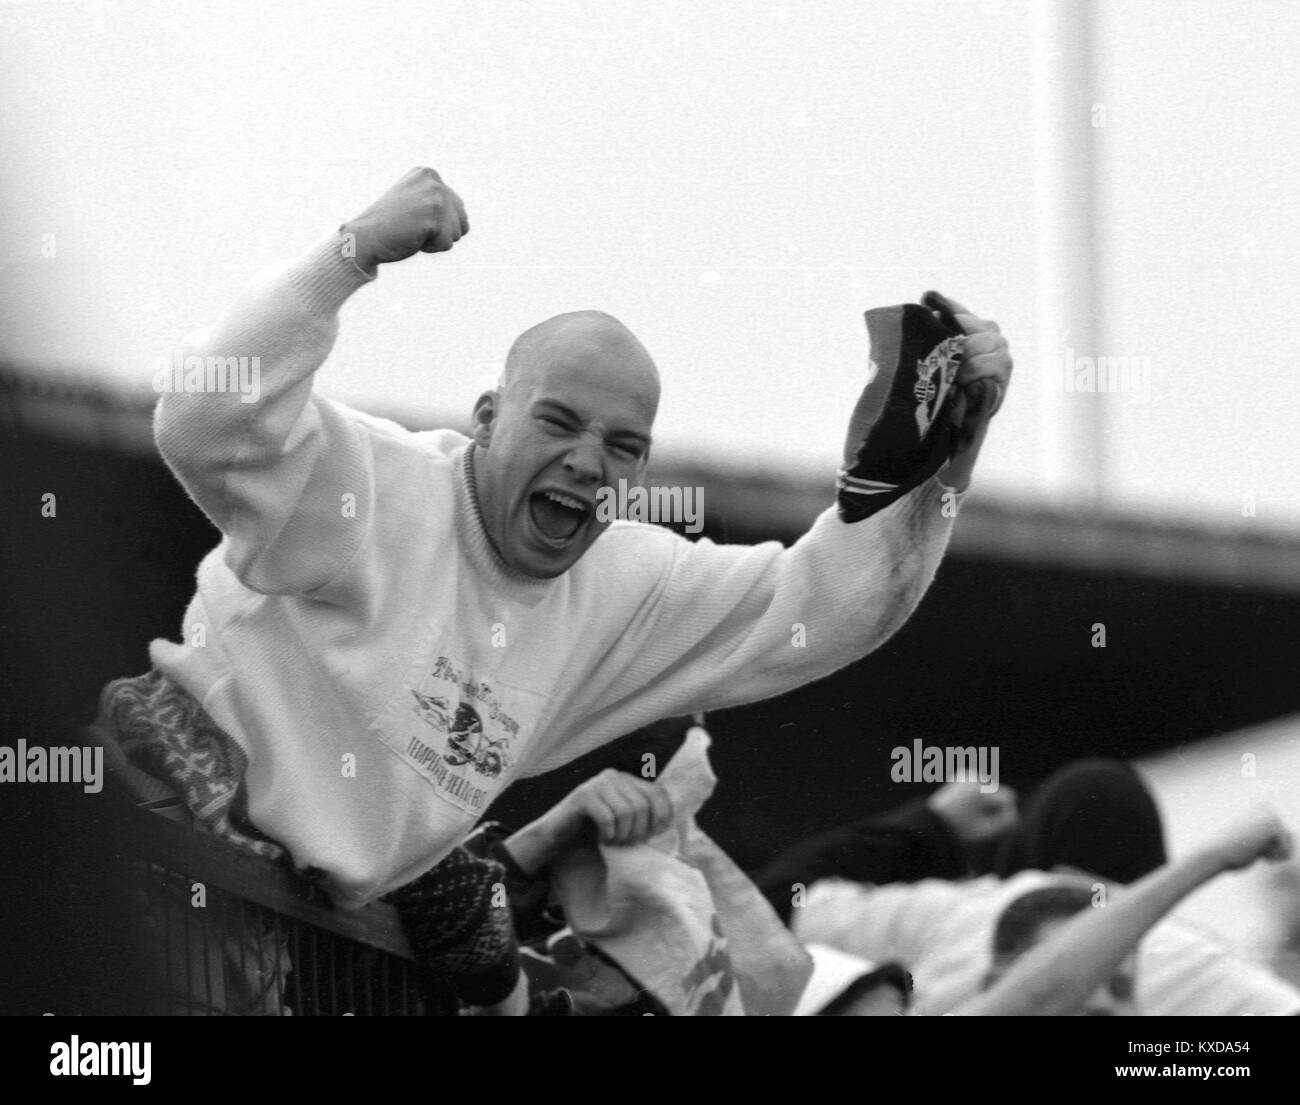 28 January 1990. Manchester United Fan celebrating during his team's win at Hereford United in the FA Cup 4th Round.  Photo by Tony Henshaw Stock Photo